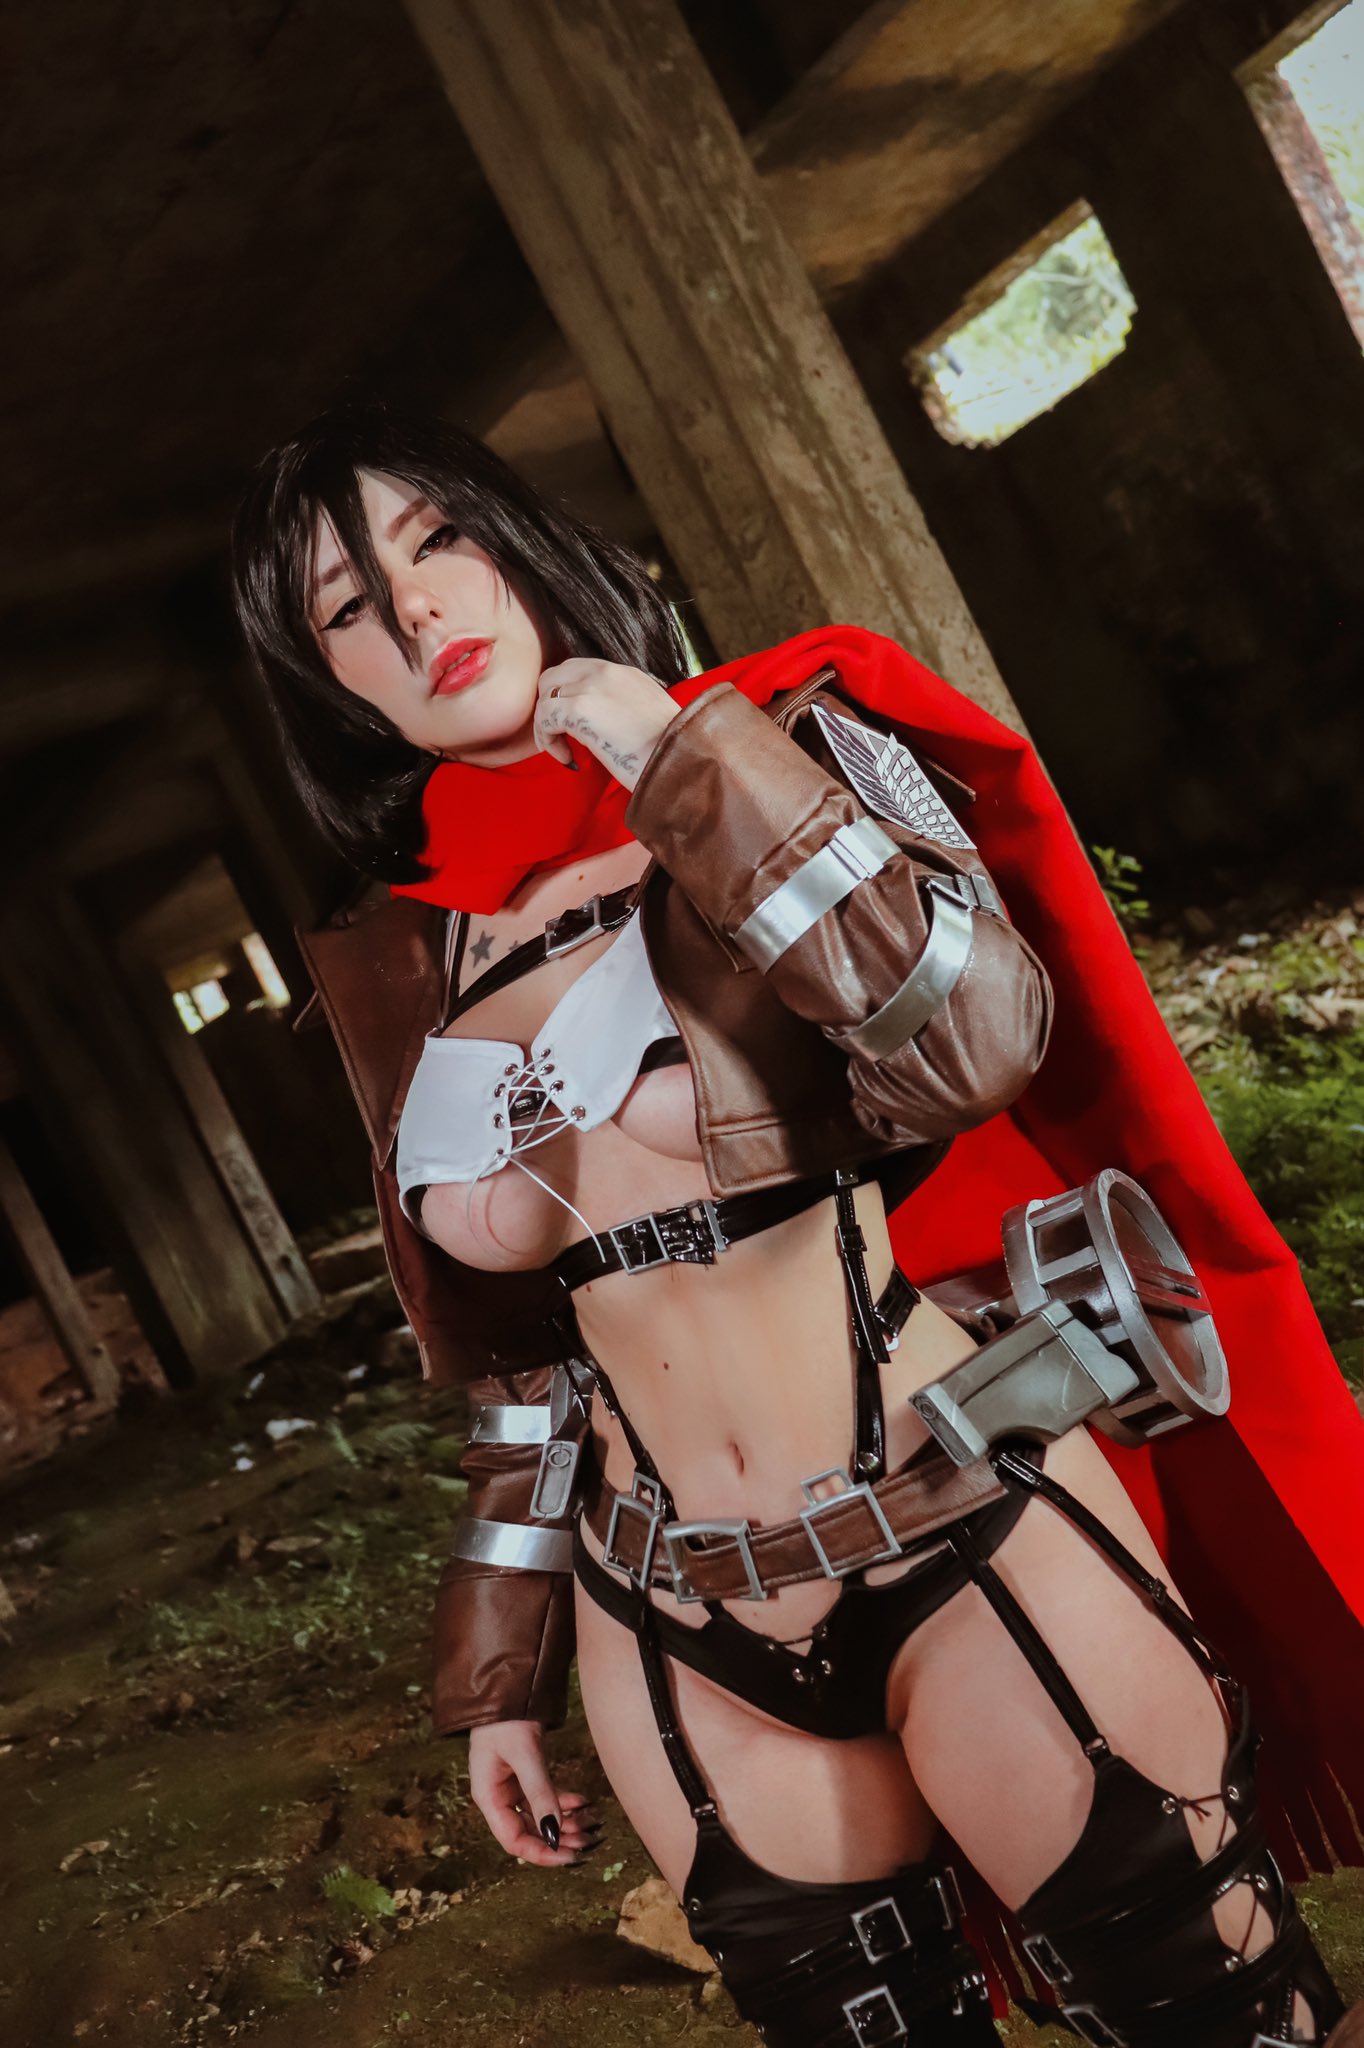 Last year I did this Mikasa version and I lost my IG…

Guess why 👀 https://t.co/51VJM6v1jw